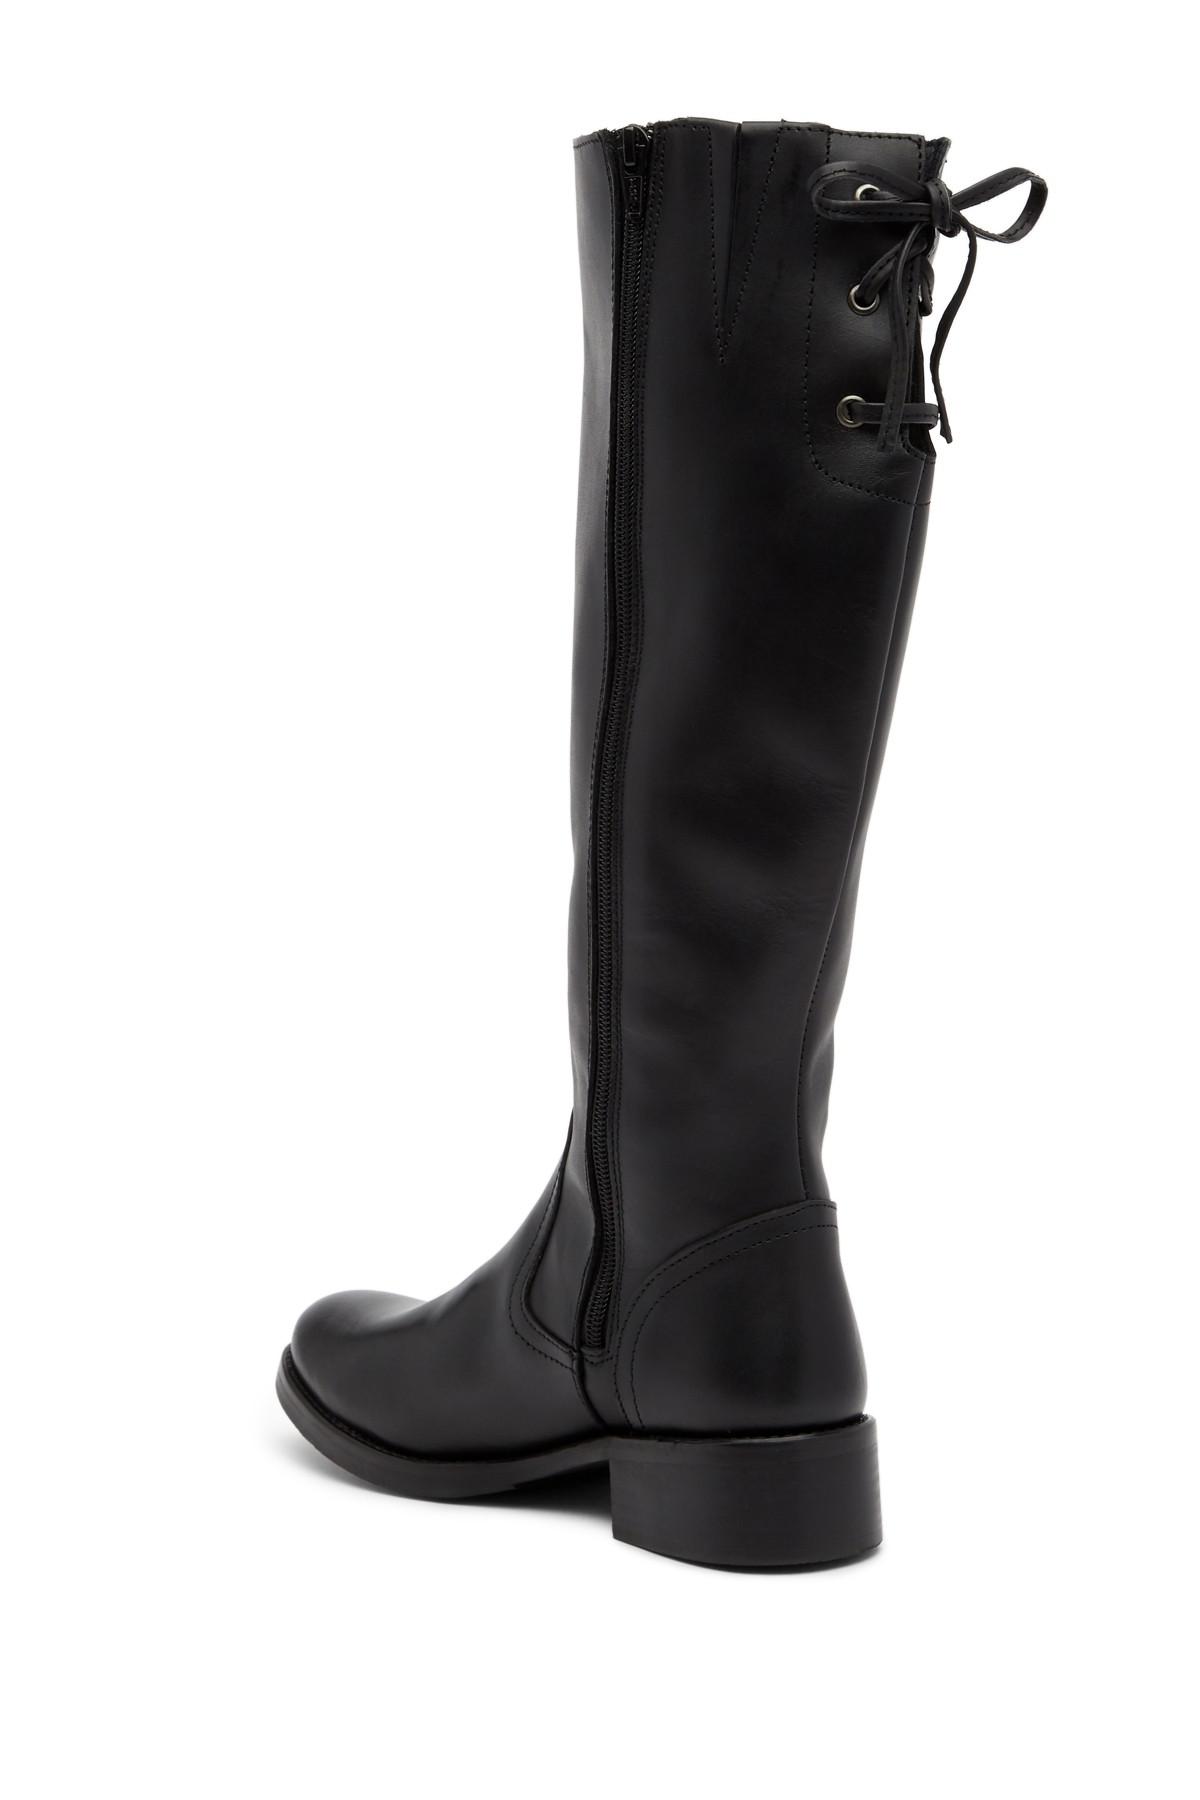 Steve Madden Lover Lace-up Back Tall Boot in Black | Lyst